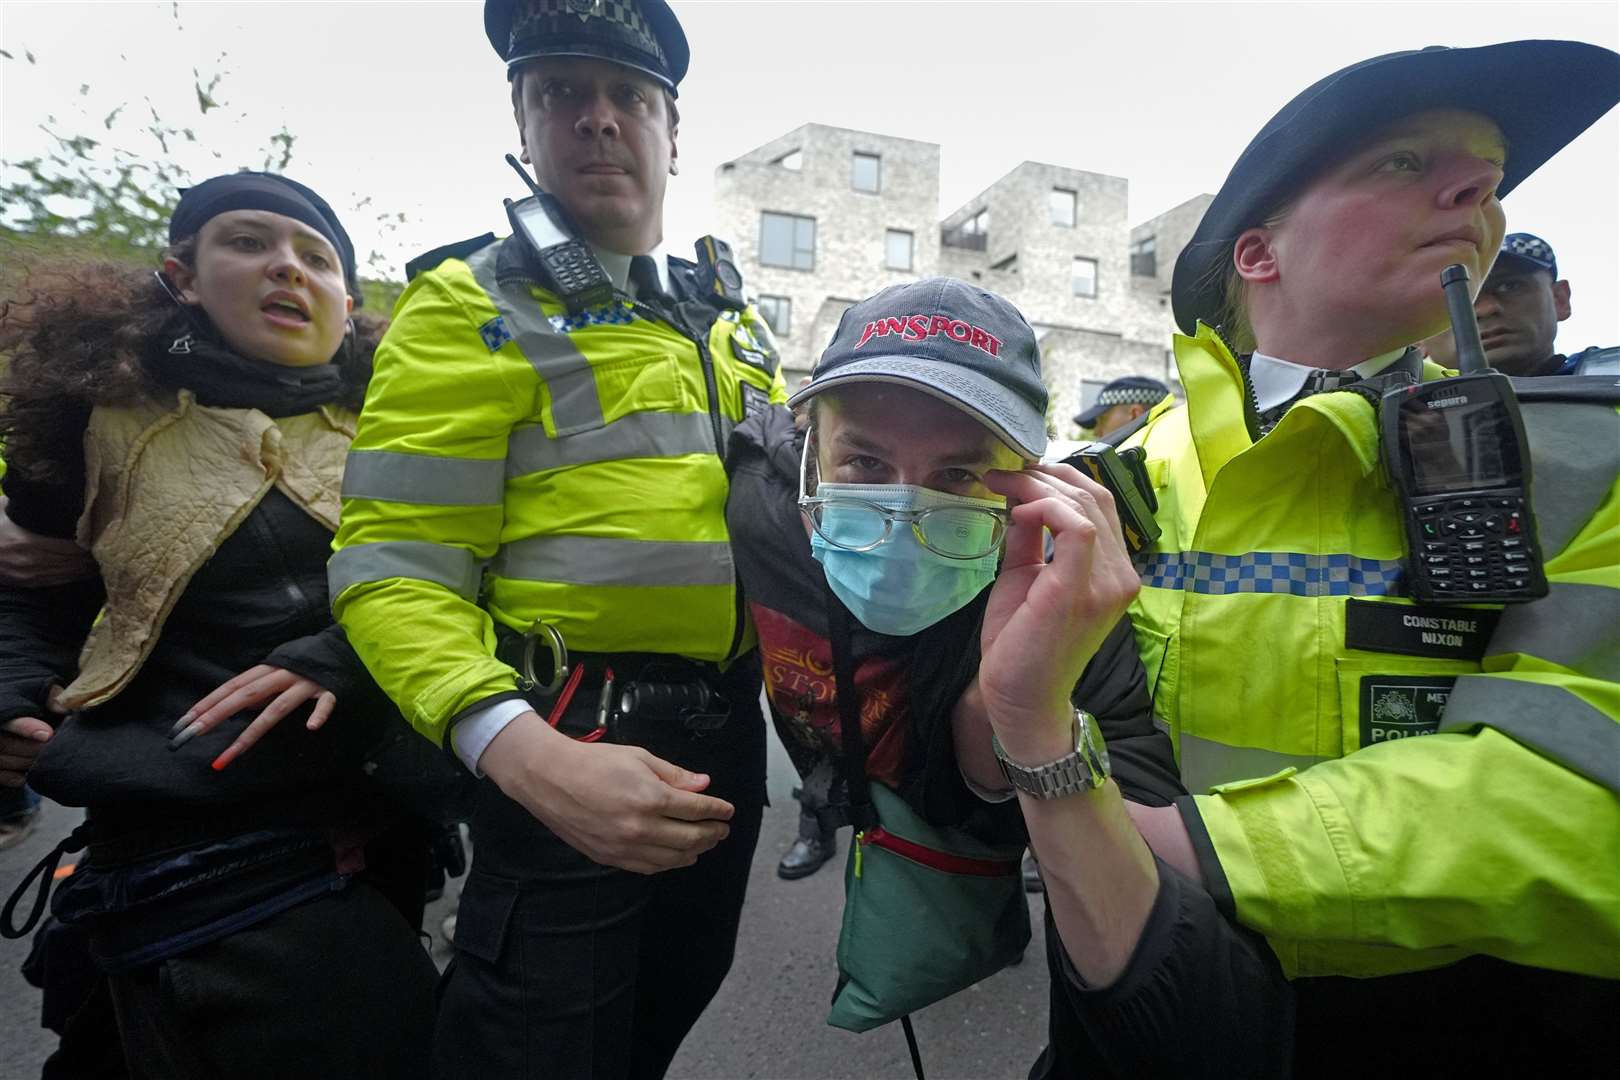 The Metropolitan Police said officers were ‘quickly on scene’ and had ‘engaged with the protesters at length’ (Yui Mok/PA)